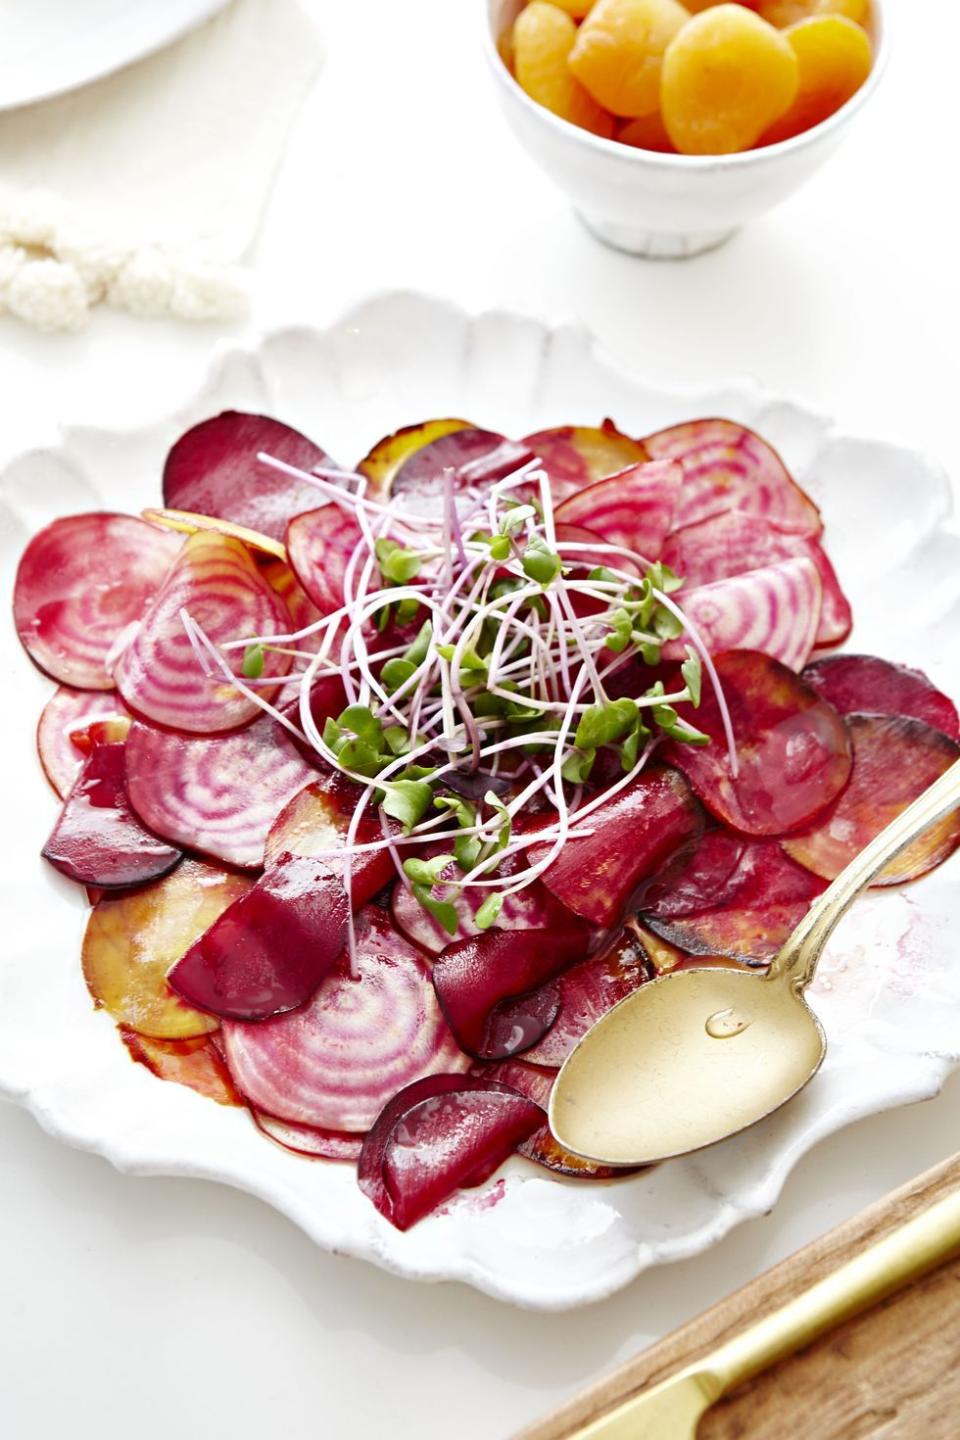 20 Inspired Beet Recipes That Go Way Beyond Winter Salads